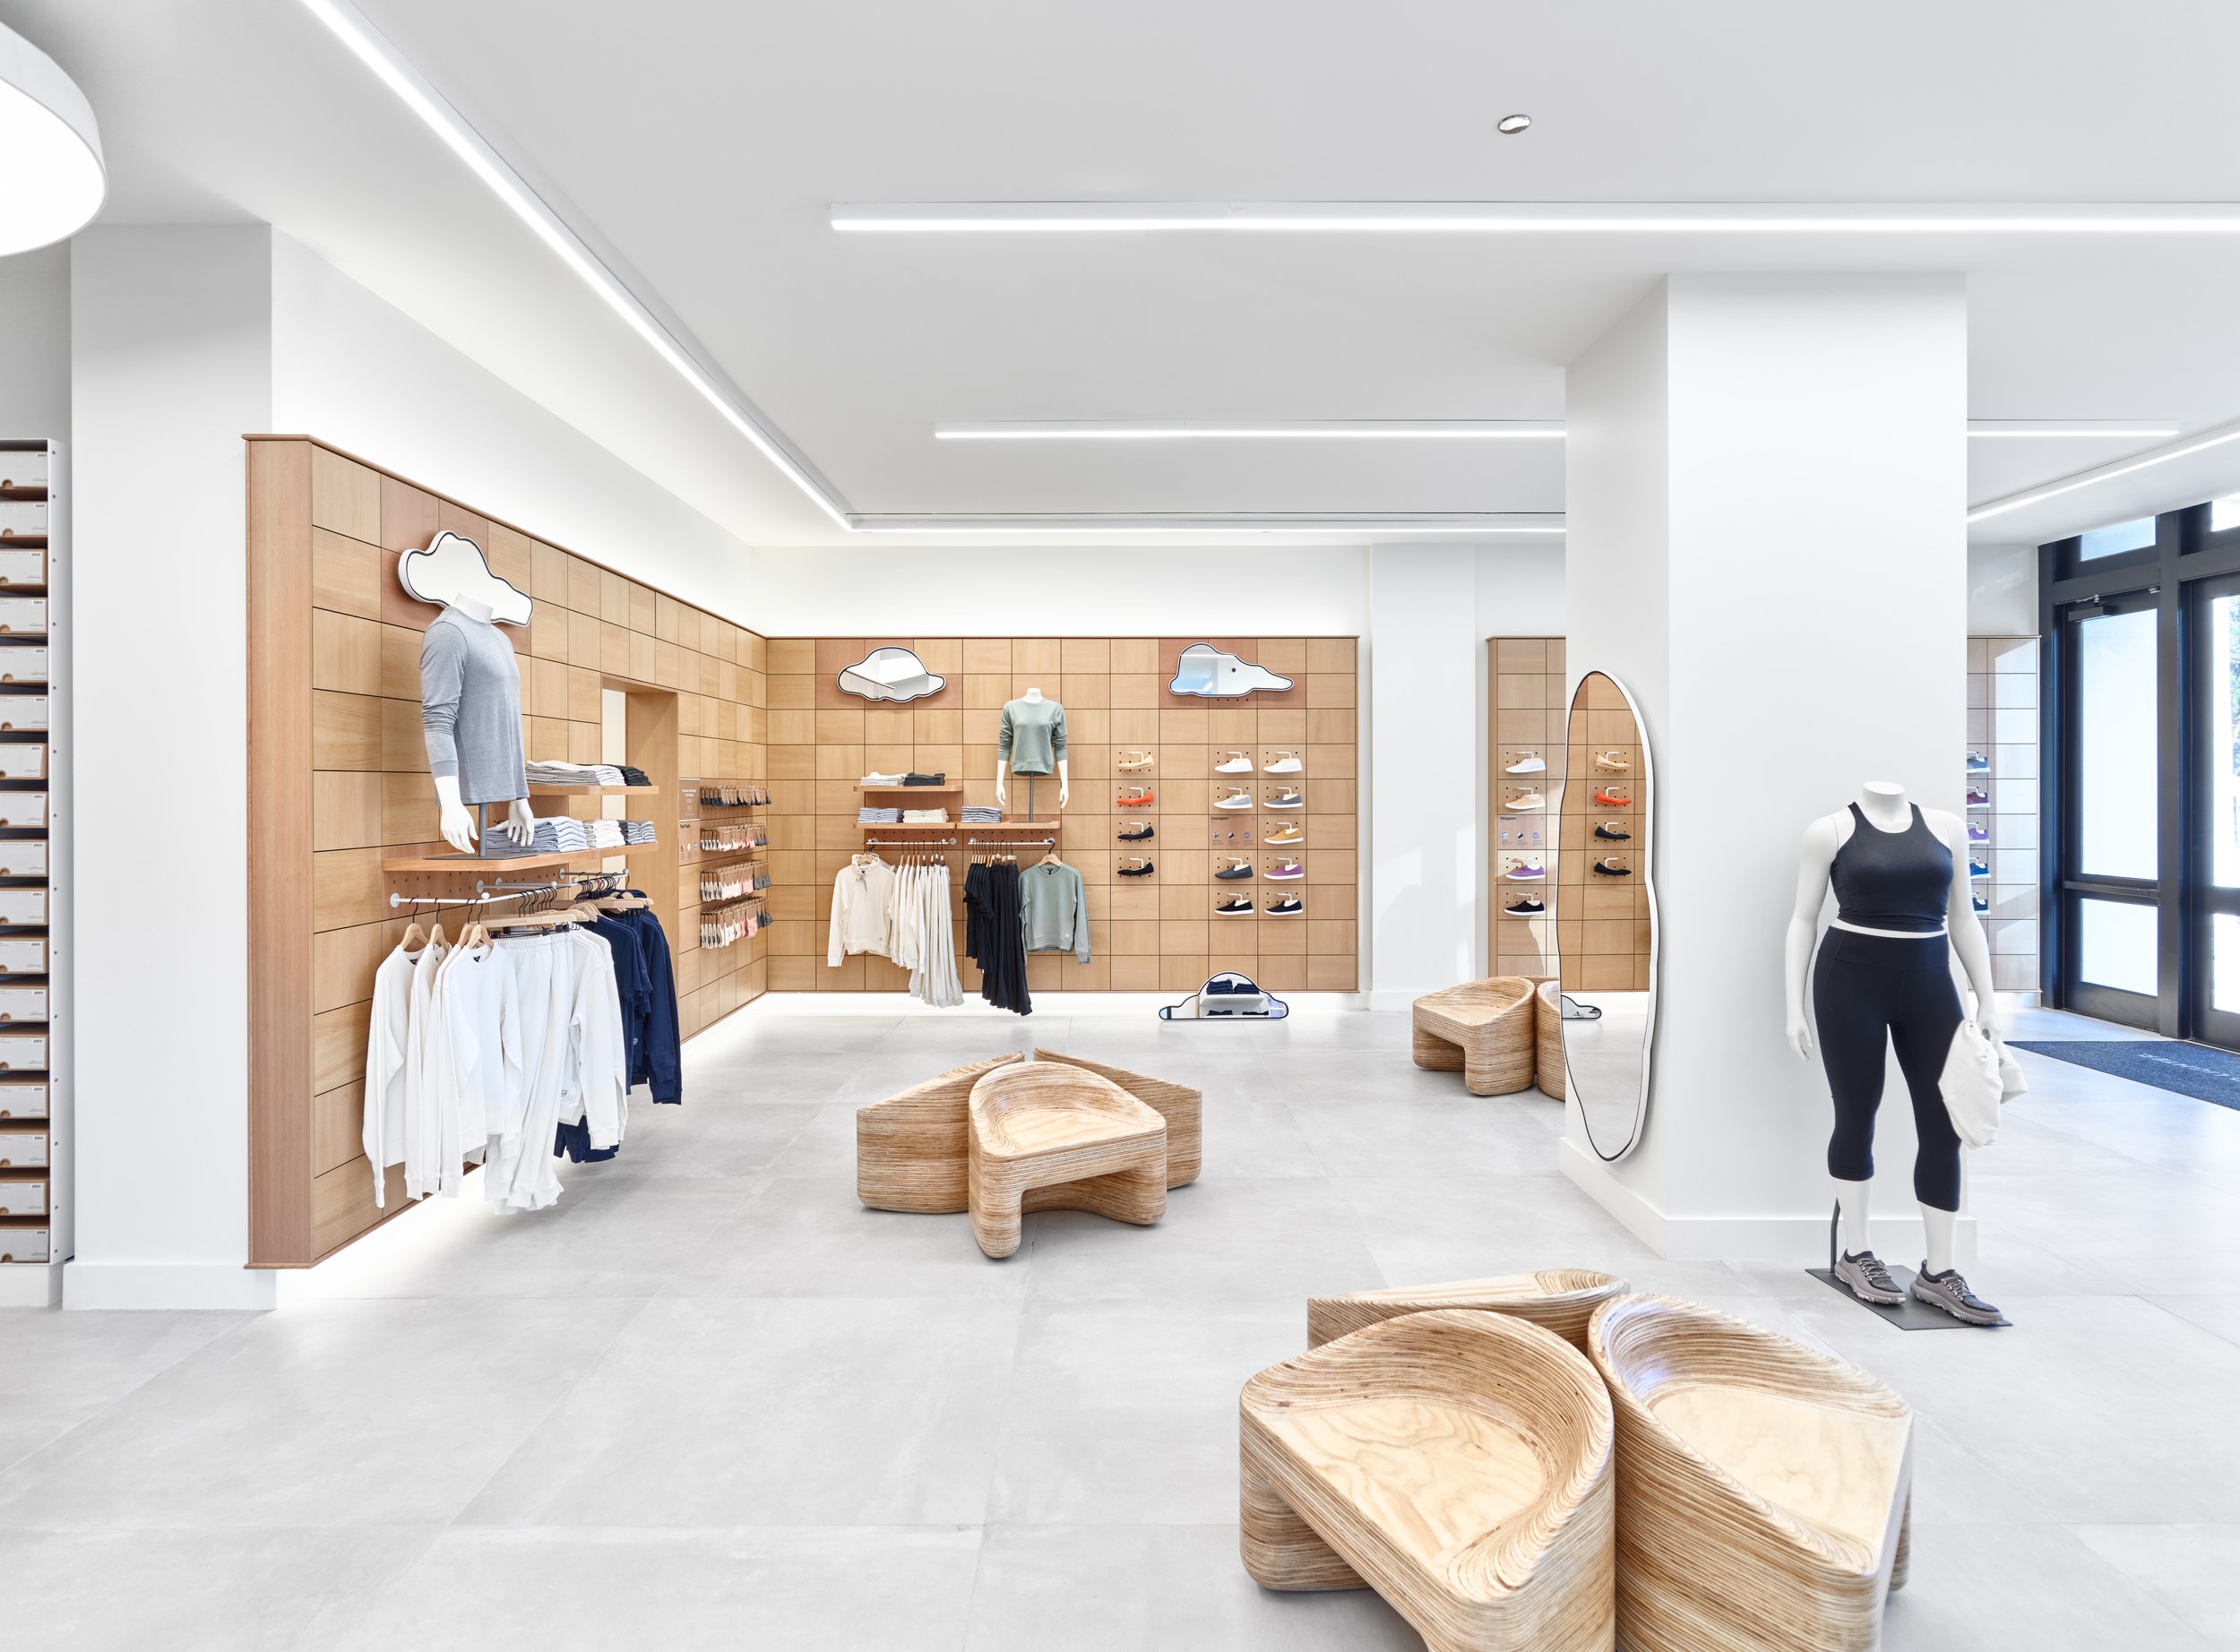  Allbirds Chicago interior and architecture retail storefront photography  